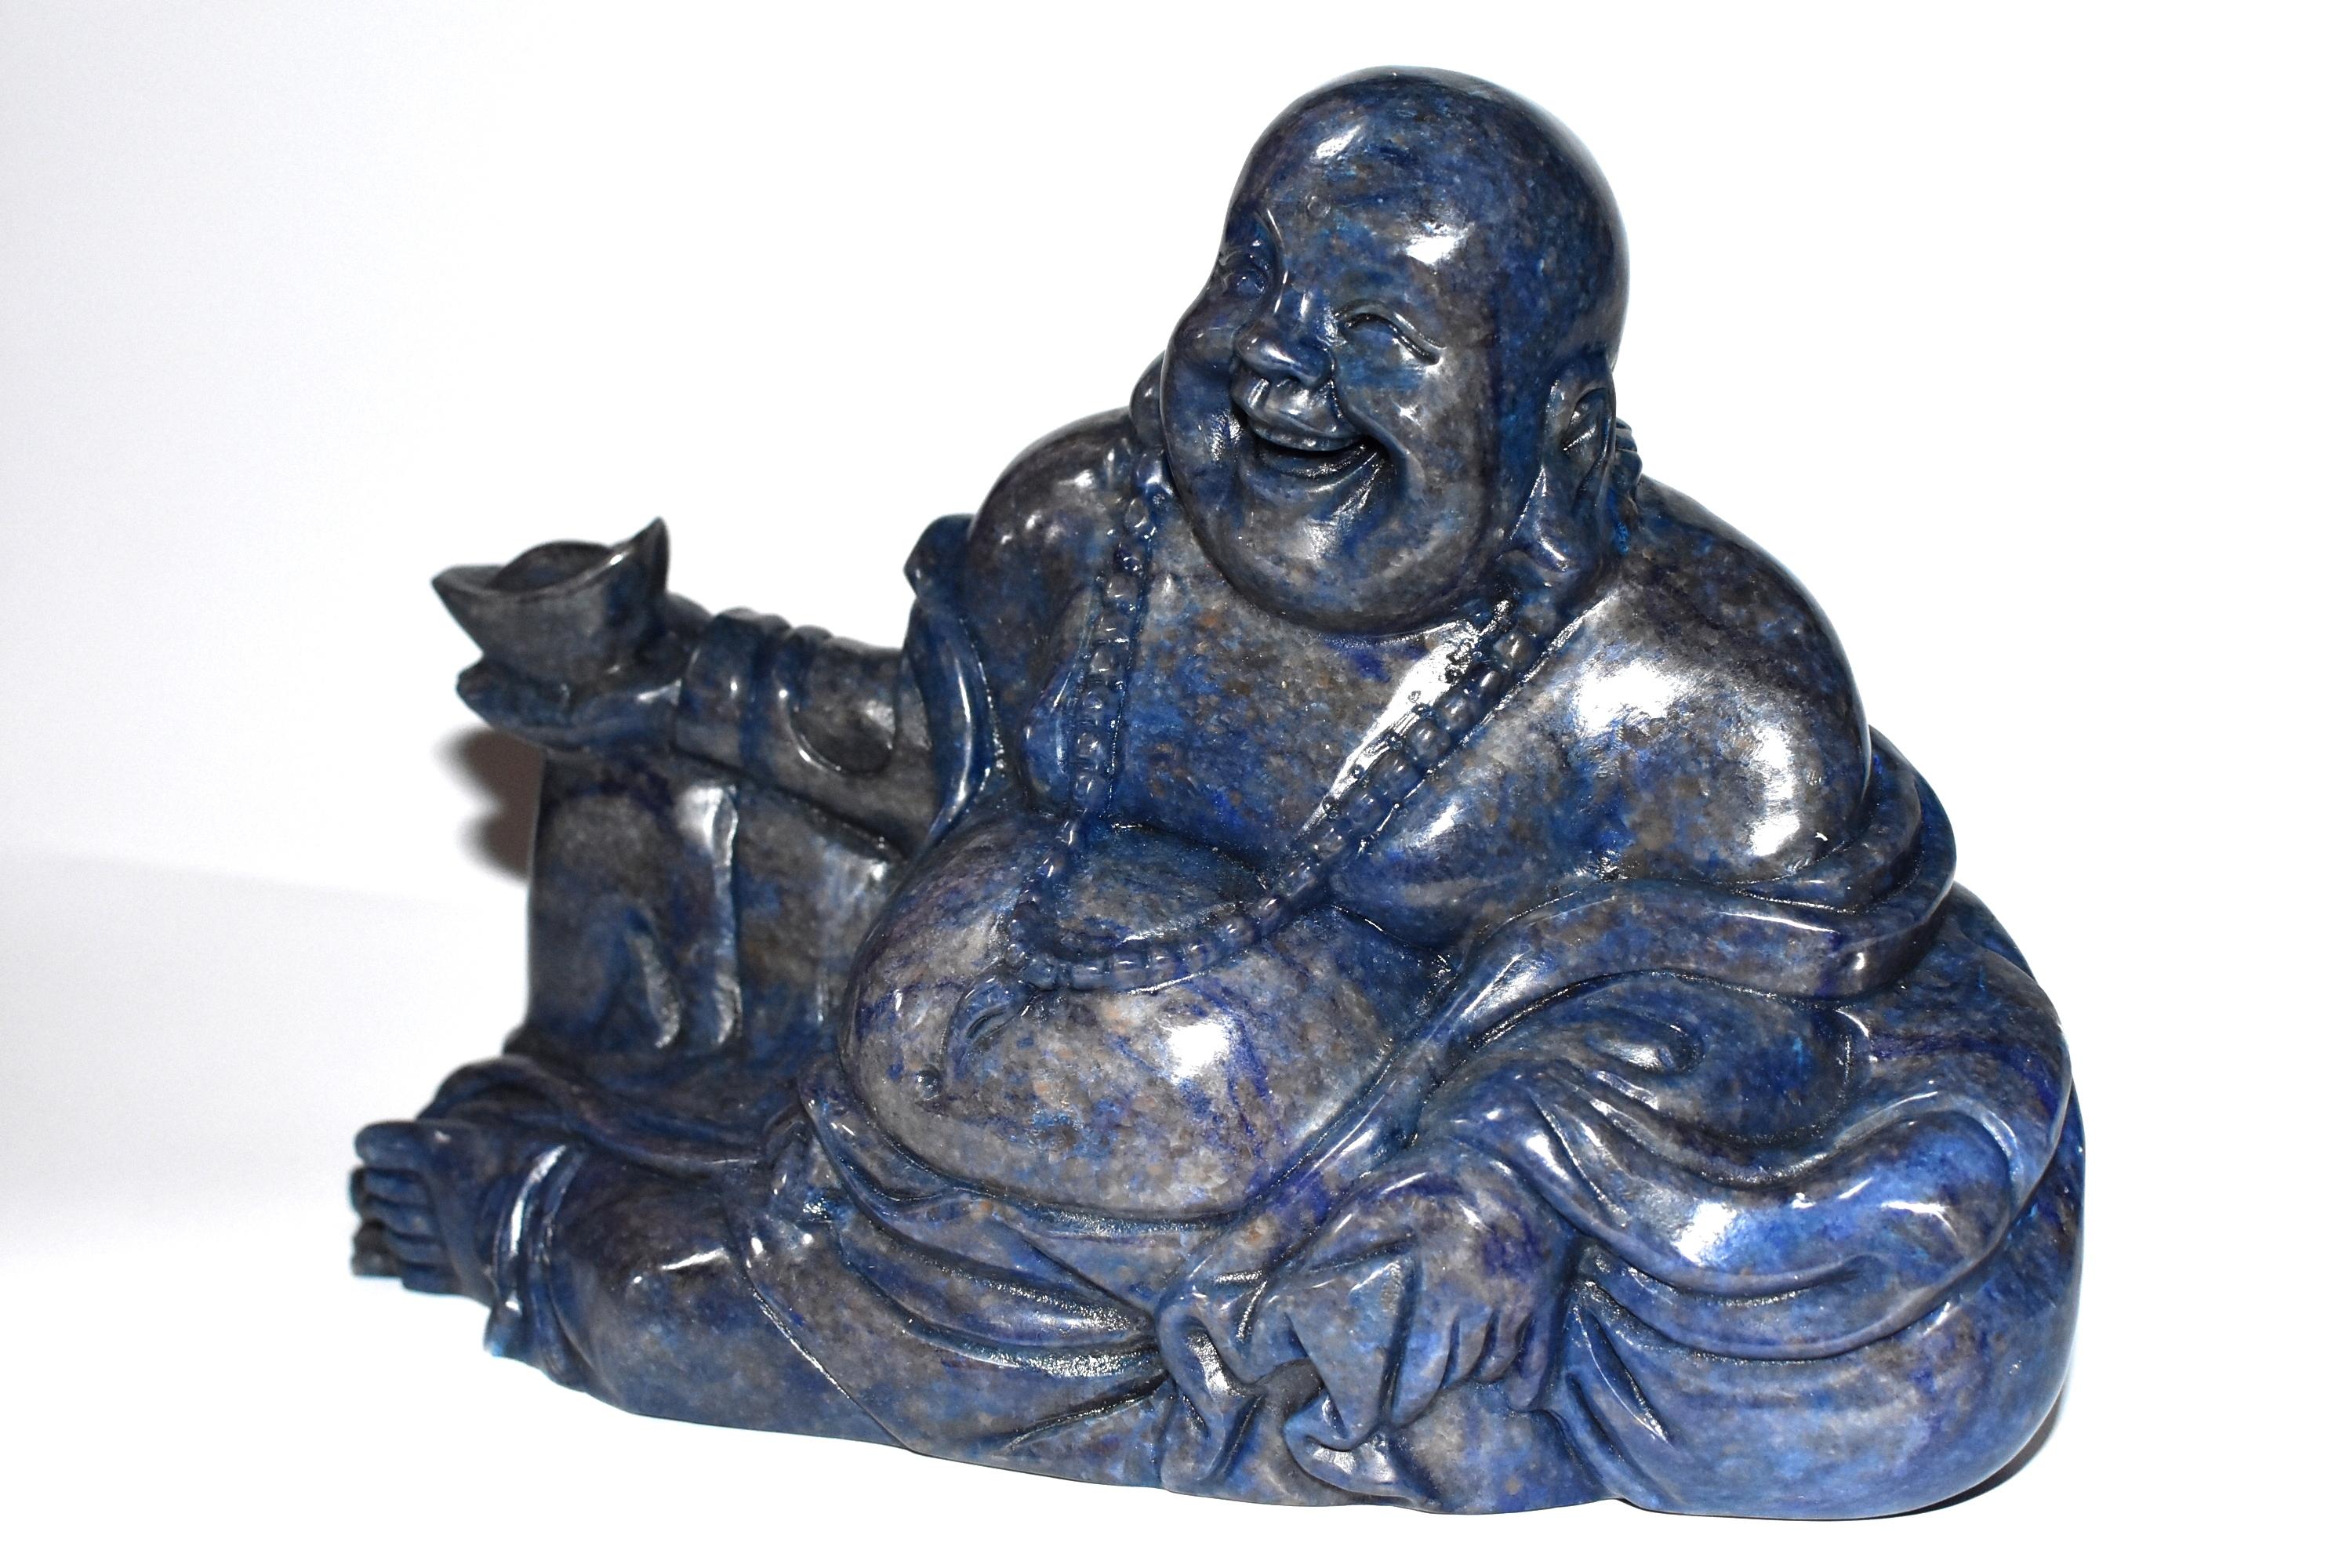 A large sculpture featuring the Chinese wealth Buddha. Weighing at an amazing 6.6 lb, the stone is gray blue with striking glittery gold. Finely carved facial features and realistic laughing expression. A great, substantial piece to boost energy and